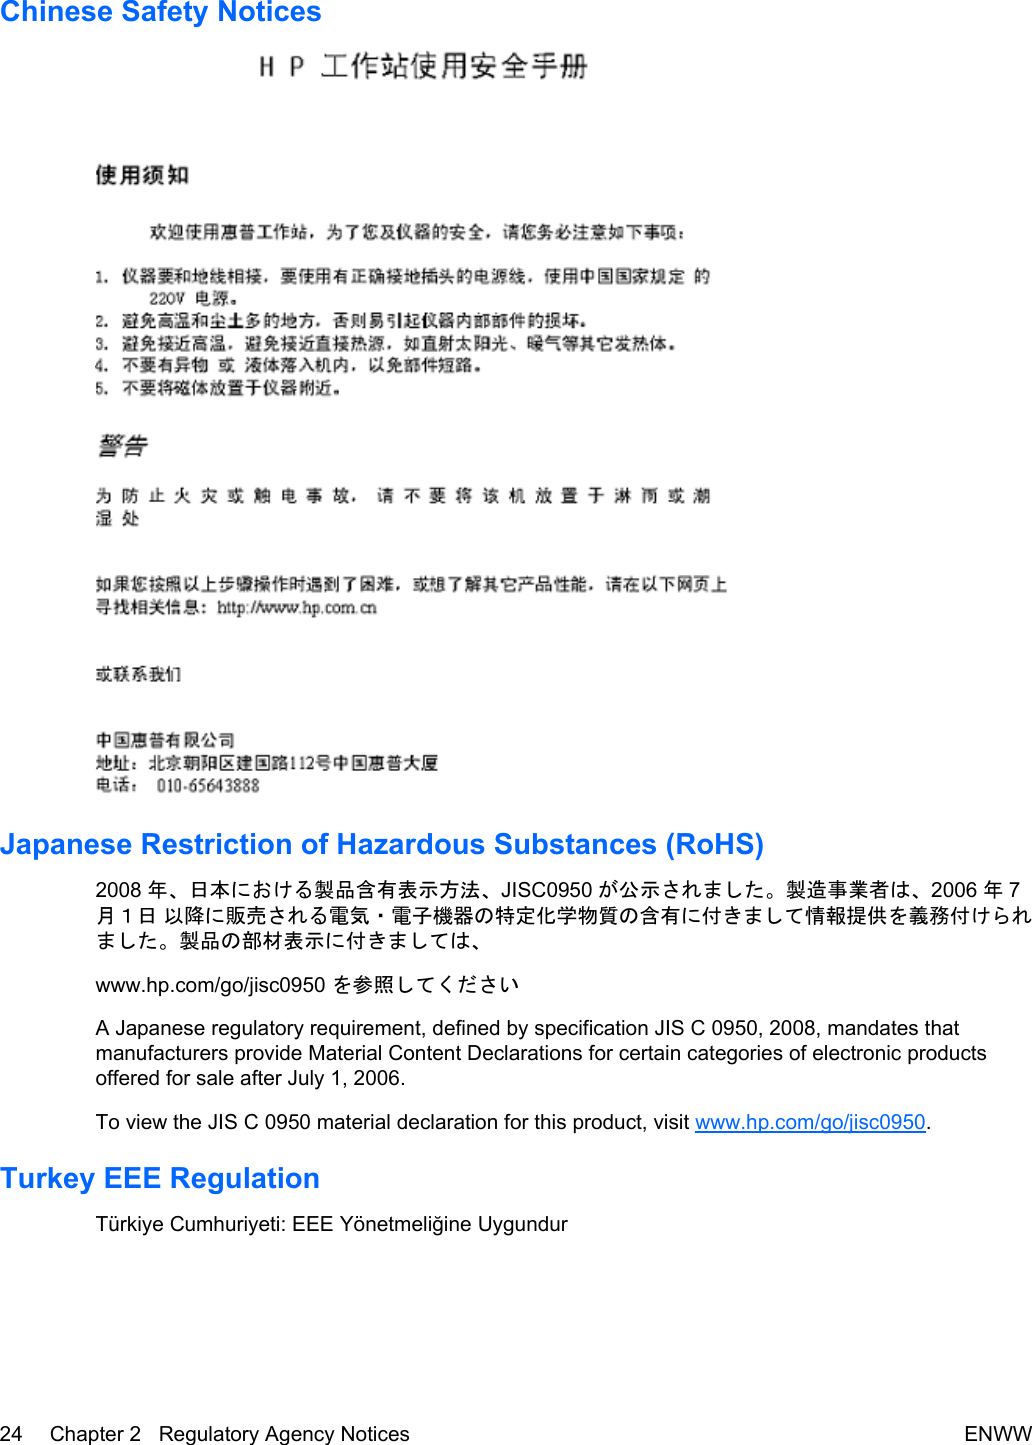 Chinese Safety NoticesJapanese Restriction of Hazardous Substances (RoHS)2008 年、日本における製品含有表示方法、JISC0950 が公示されました。製造事業者は、2006 年7月１日 以降に販売される電気・電子機器の特定化学物質の含有に付きまして情報提供を義務付けられました。製品の部材表示に付きましては、www.hp.com/go/jisc0950 を参照してくださいA Japanese regulatory requirement, defined by specification JIS C 0950, 2008, mandates thatmanufacturers provide Material Content Declarations for certain categories of electronic productsoffered for sale after July 1, 2006.To view the JIS C 0950 material declaration for this product, visit www.hp.com/go/jisc0950.Turkey EEE RegulationTürkiye Cumhuriyeti: EEE Yönetmeliğine Uygundur24 Chapter 2   Regulatory Agency Notices ENWW